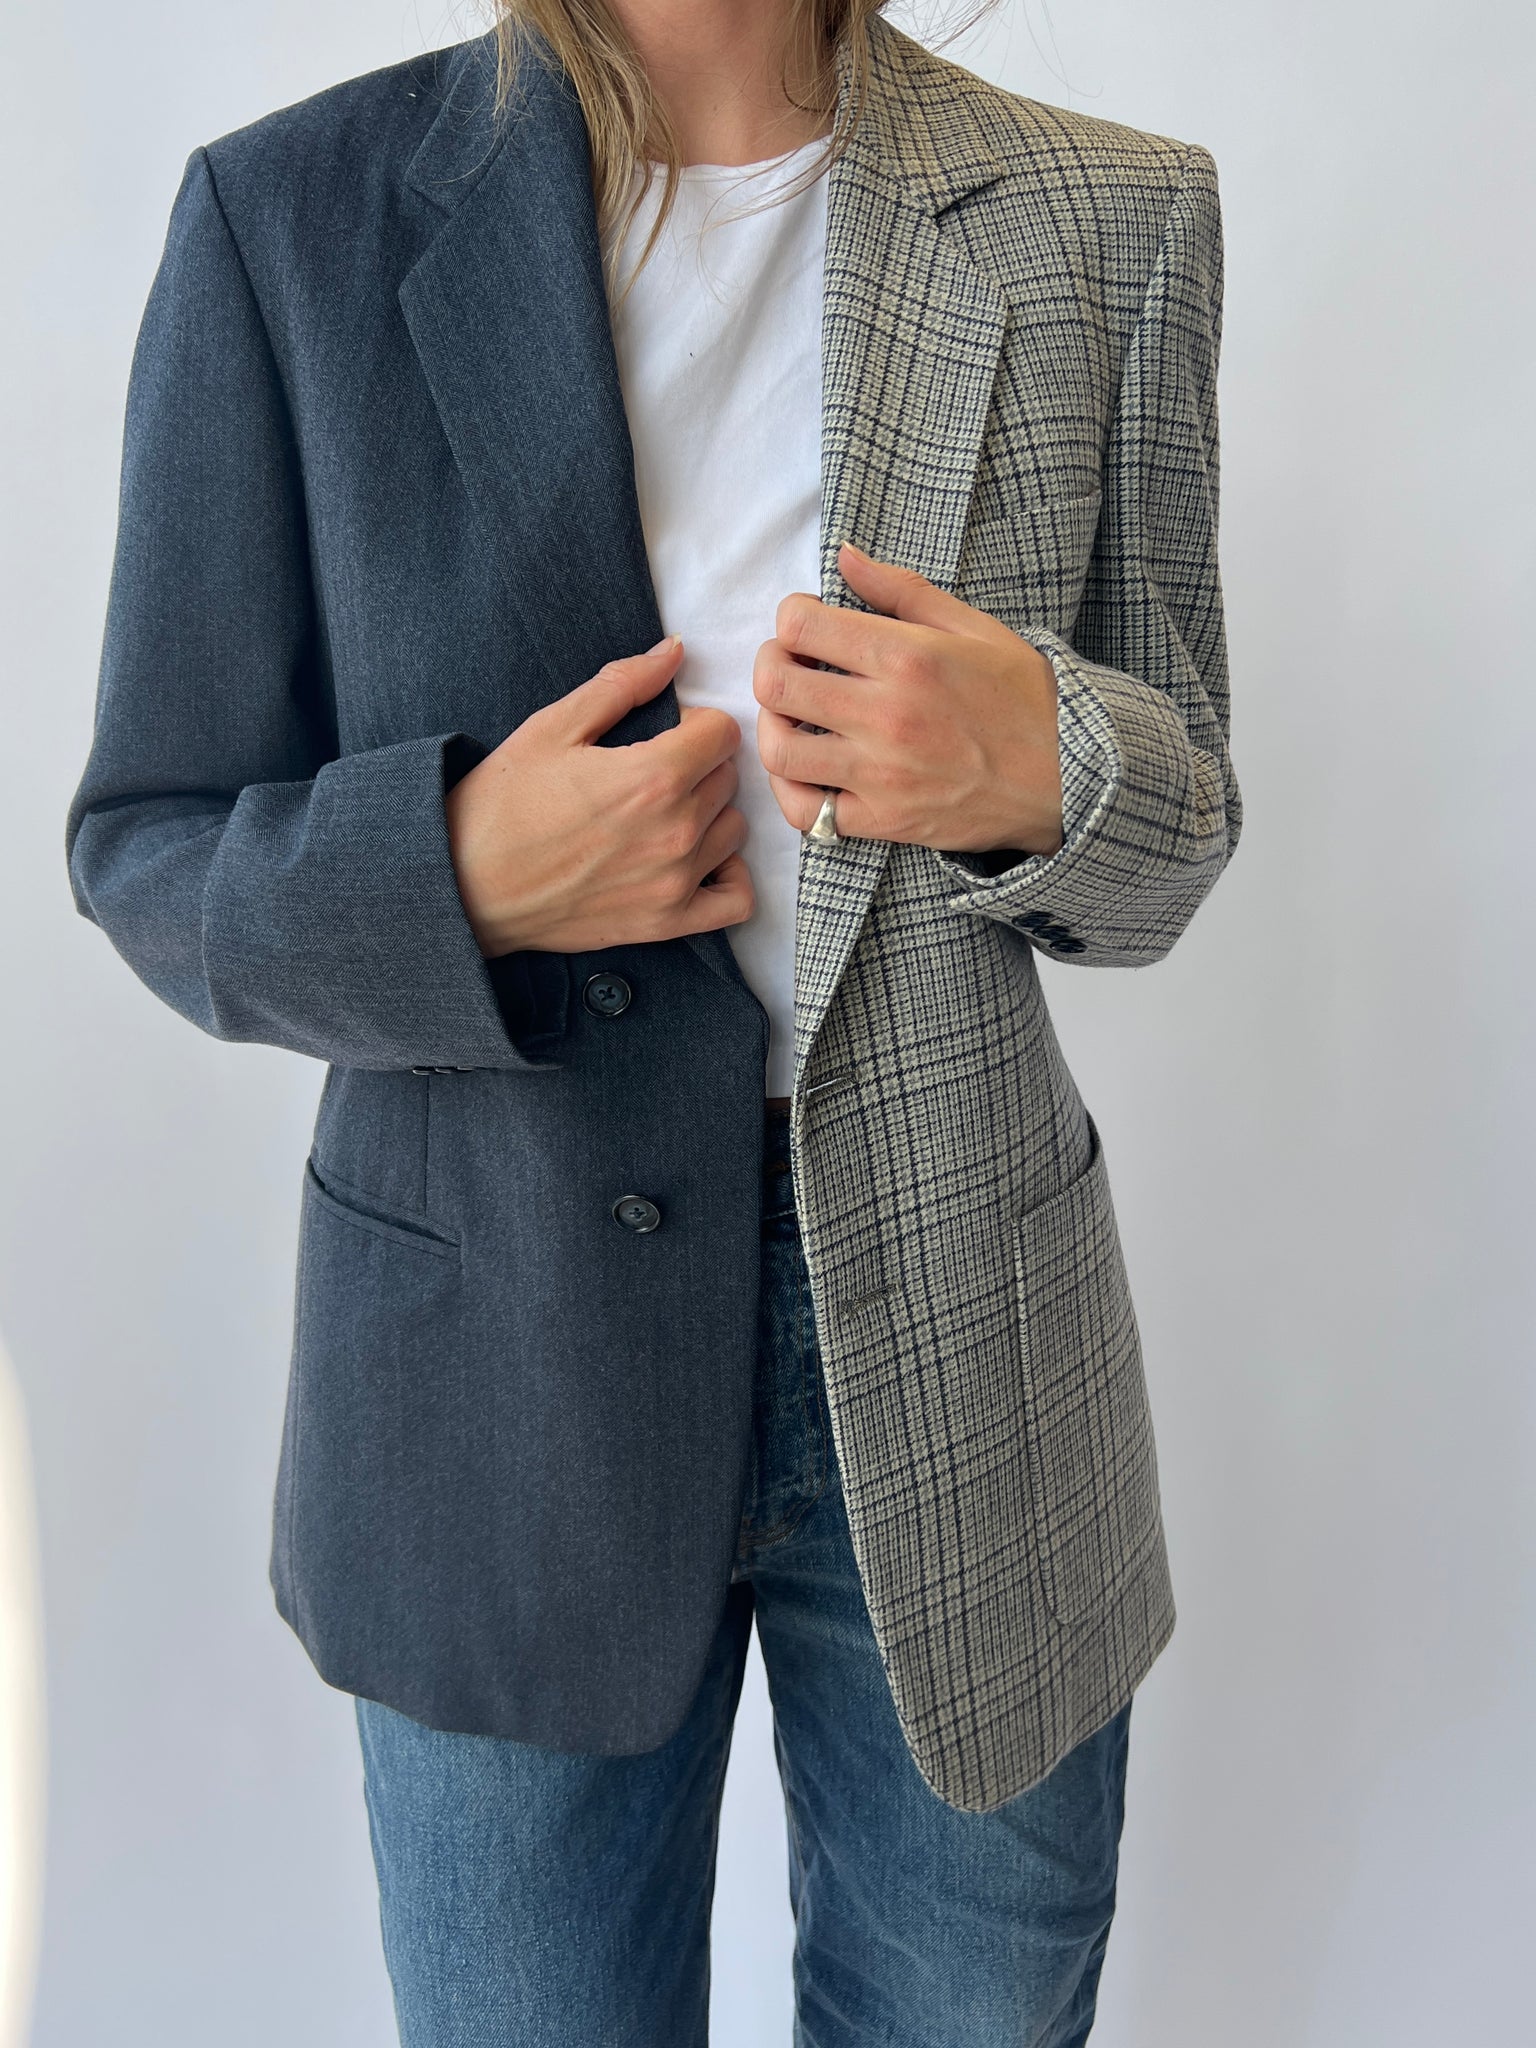 Grey and plaid contrasted Blazer